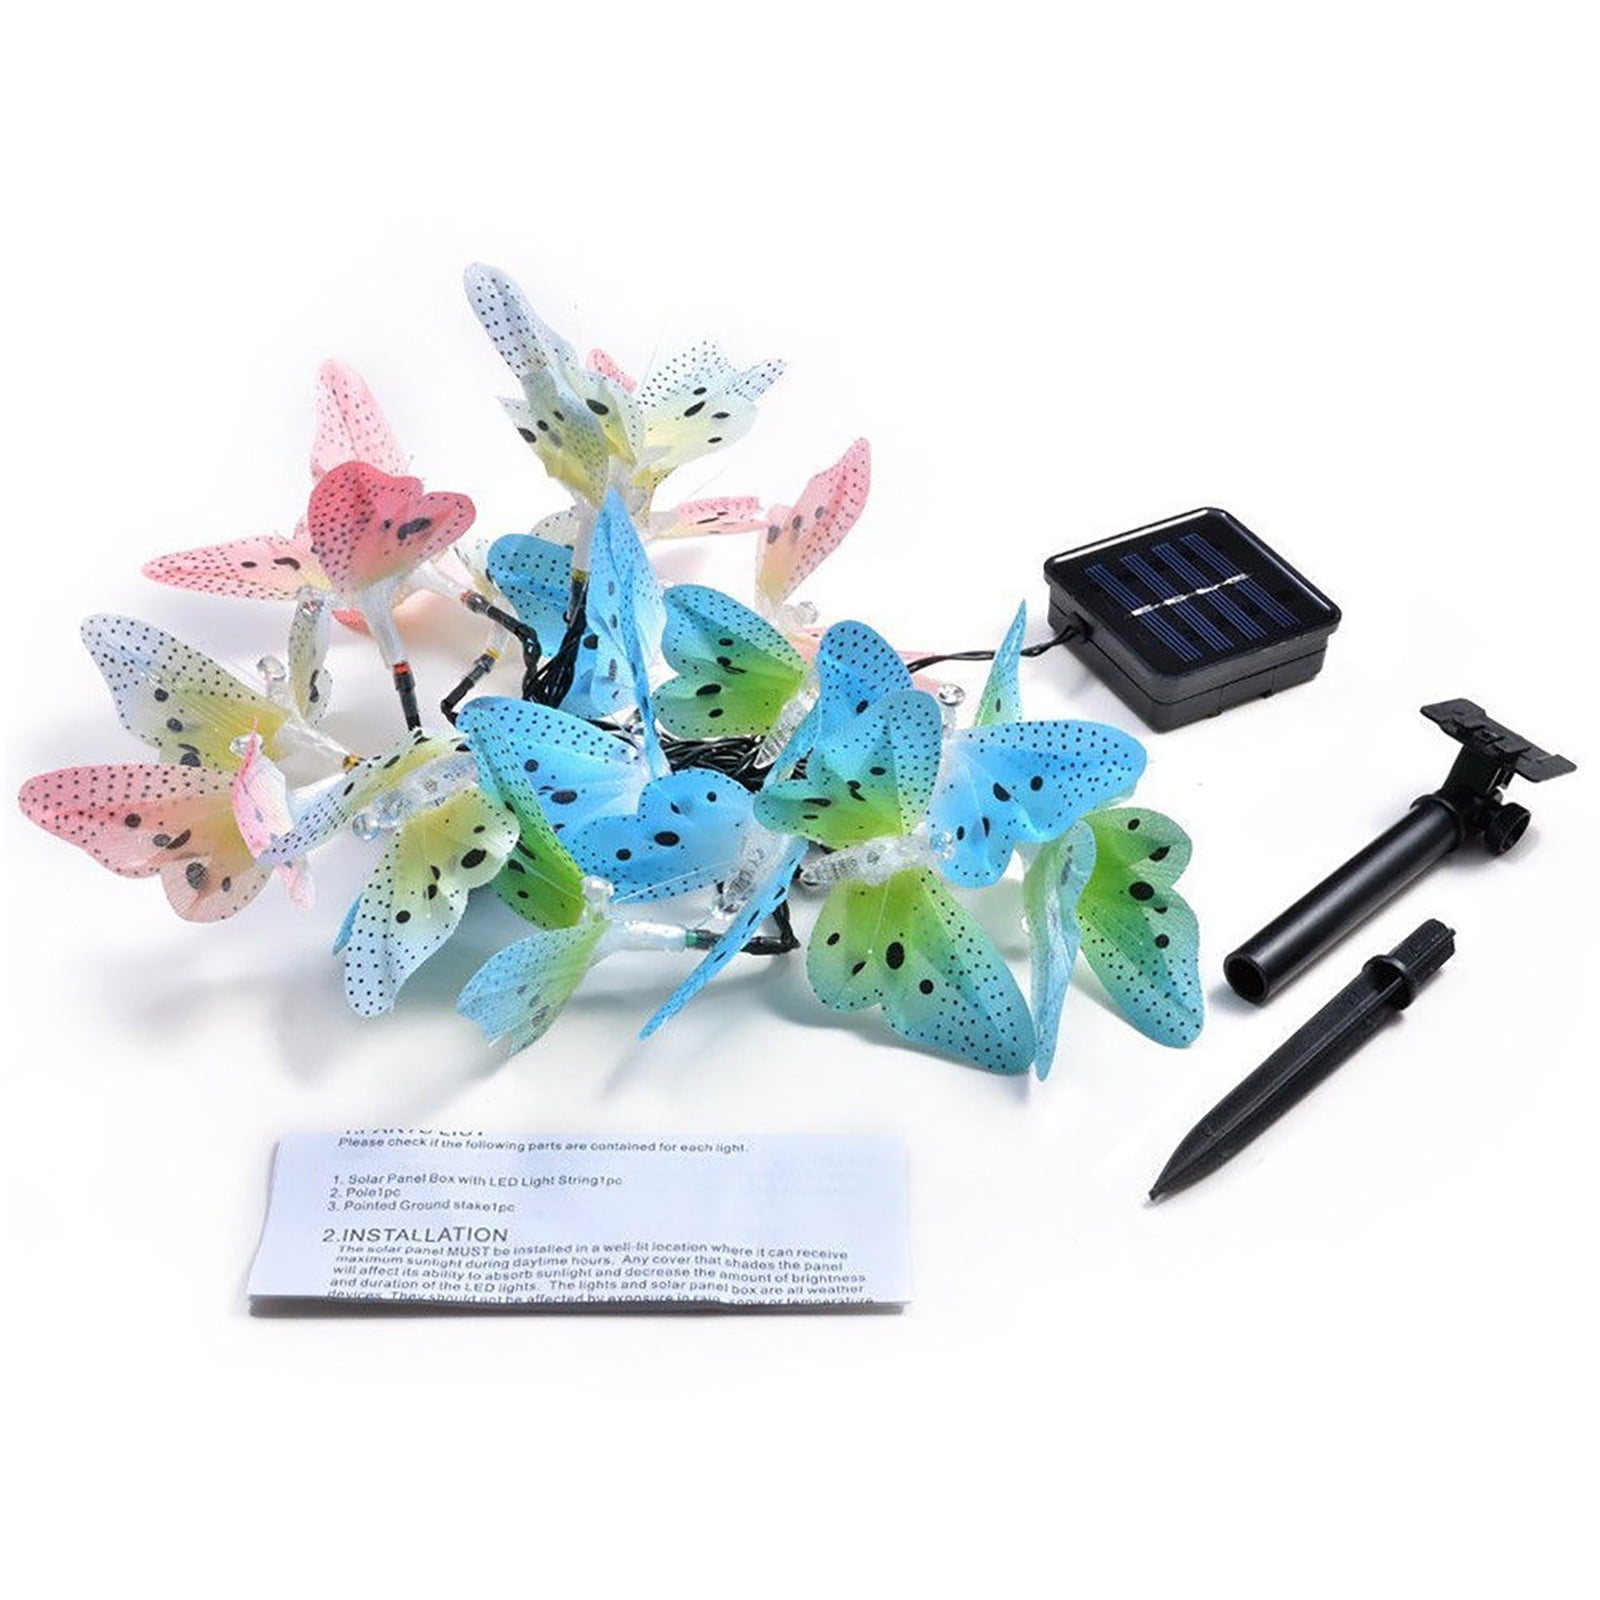 NO WIRES. GARDEN THEATRE 12 FIBRE OPTIC SOLAR POWERED BUTTERFLY LIGHTS 